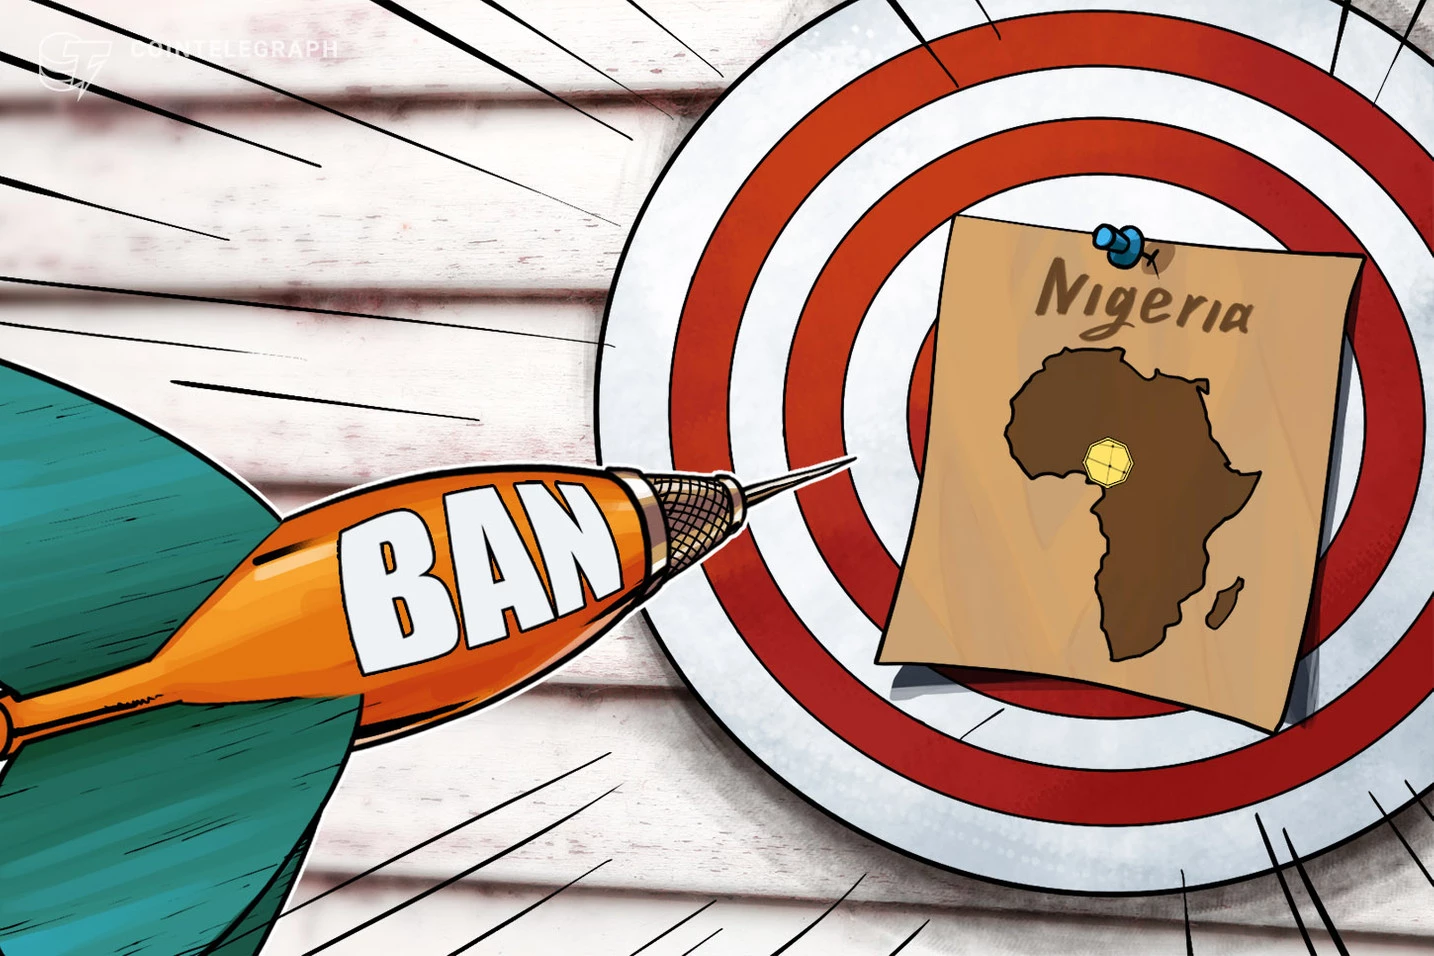 Ban in Nigeria: How to Buy Cryptocurrency in Nigeria?